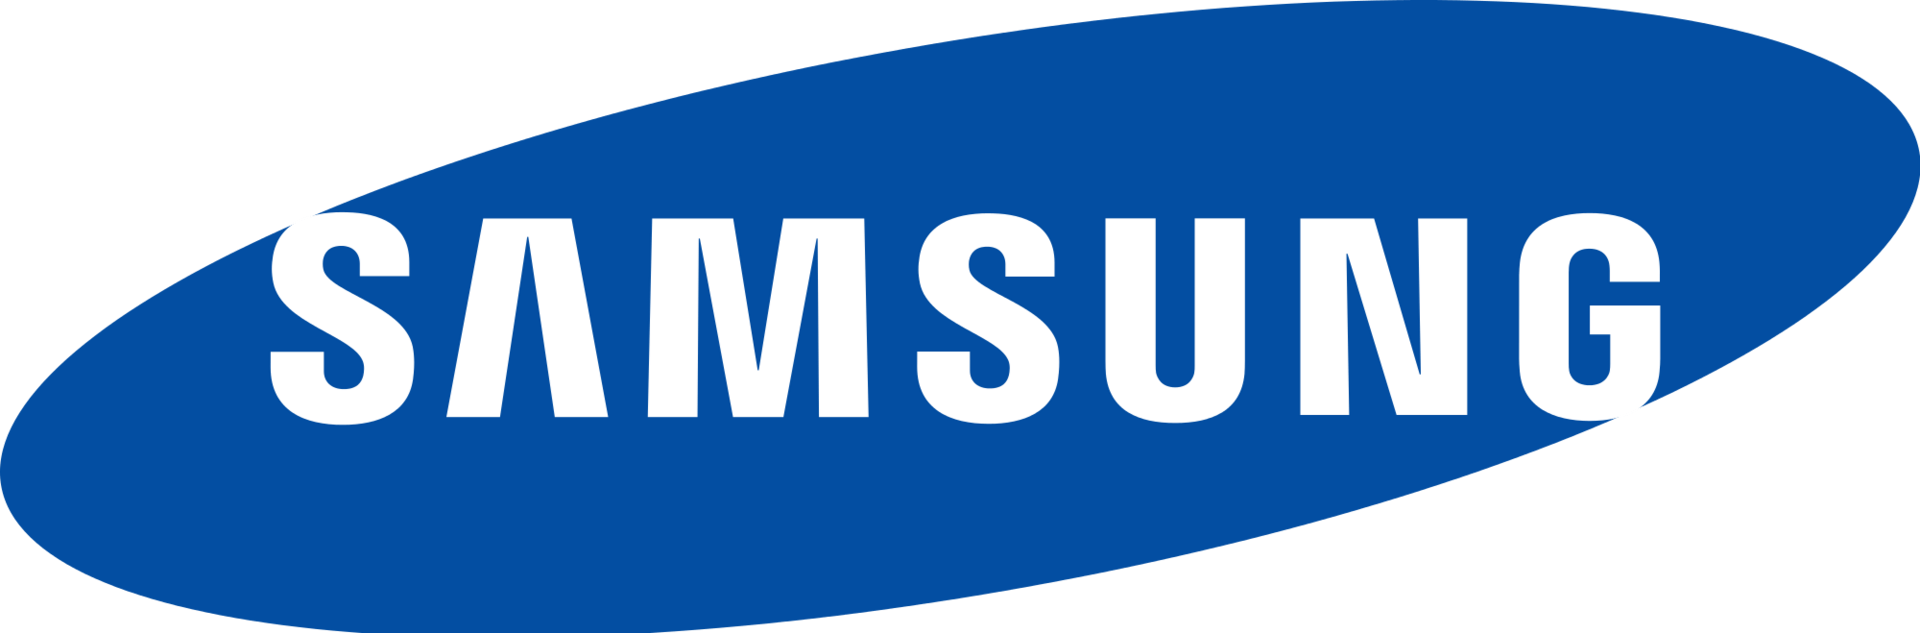 Samsung Corp Logo - Samsung might split in two.net News